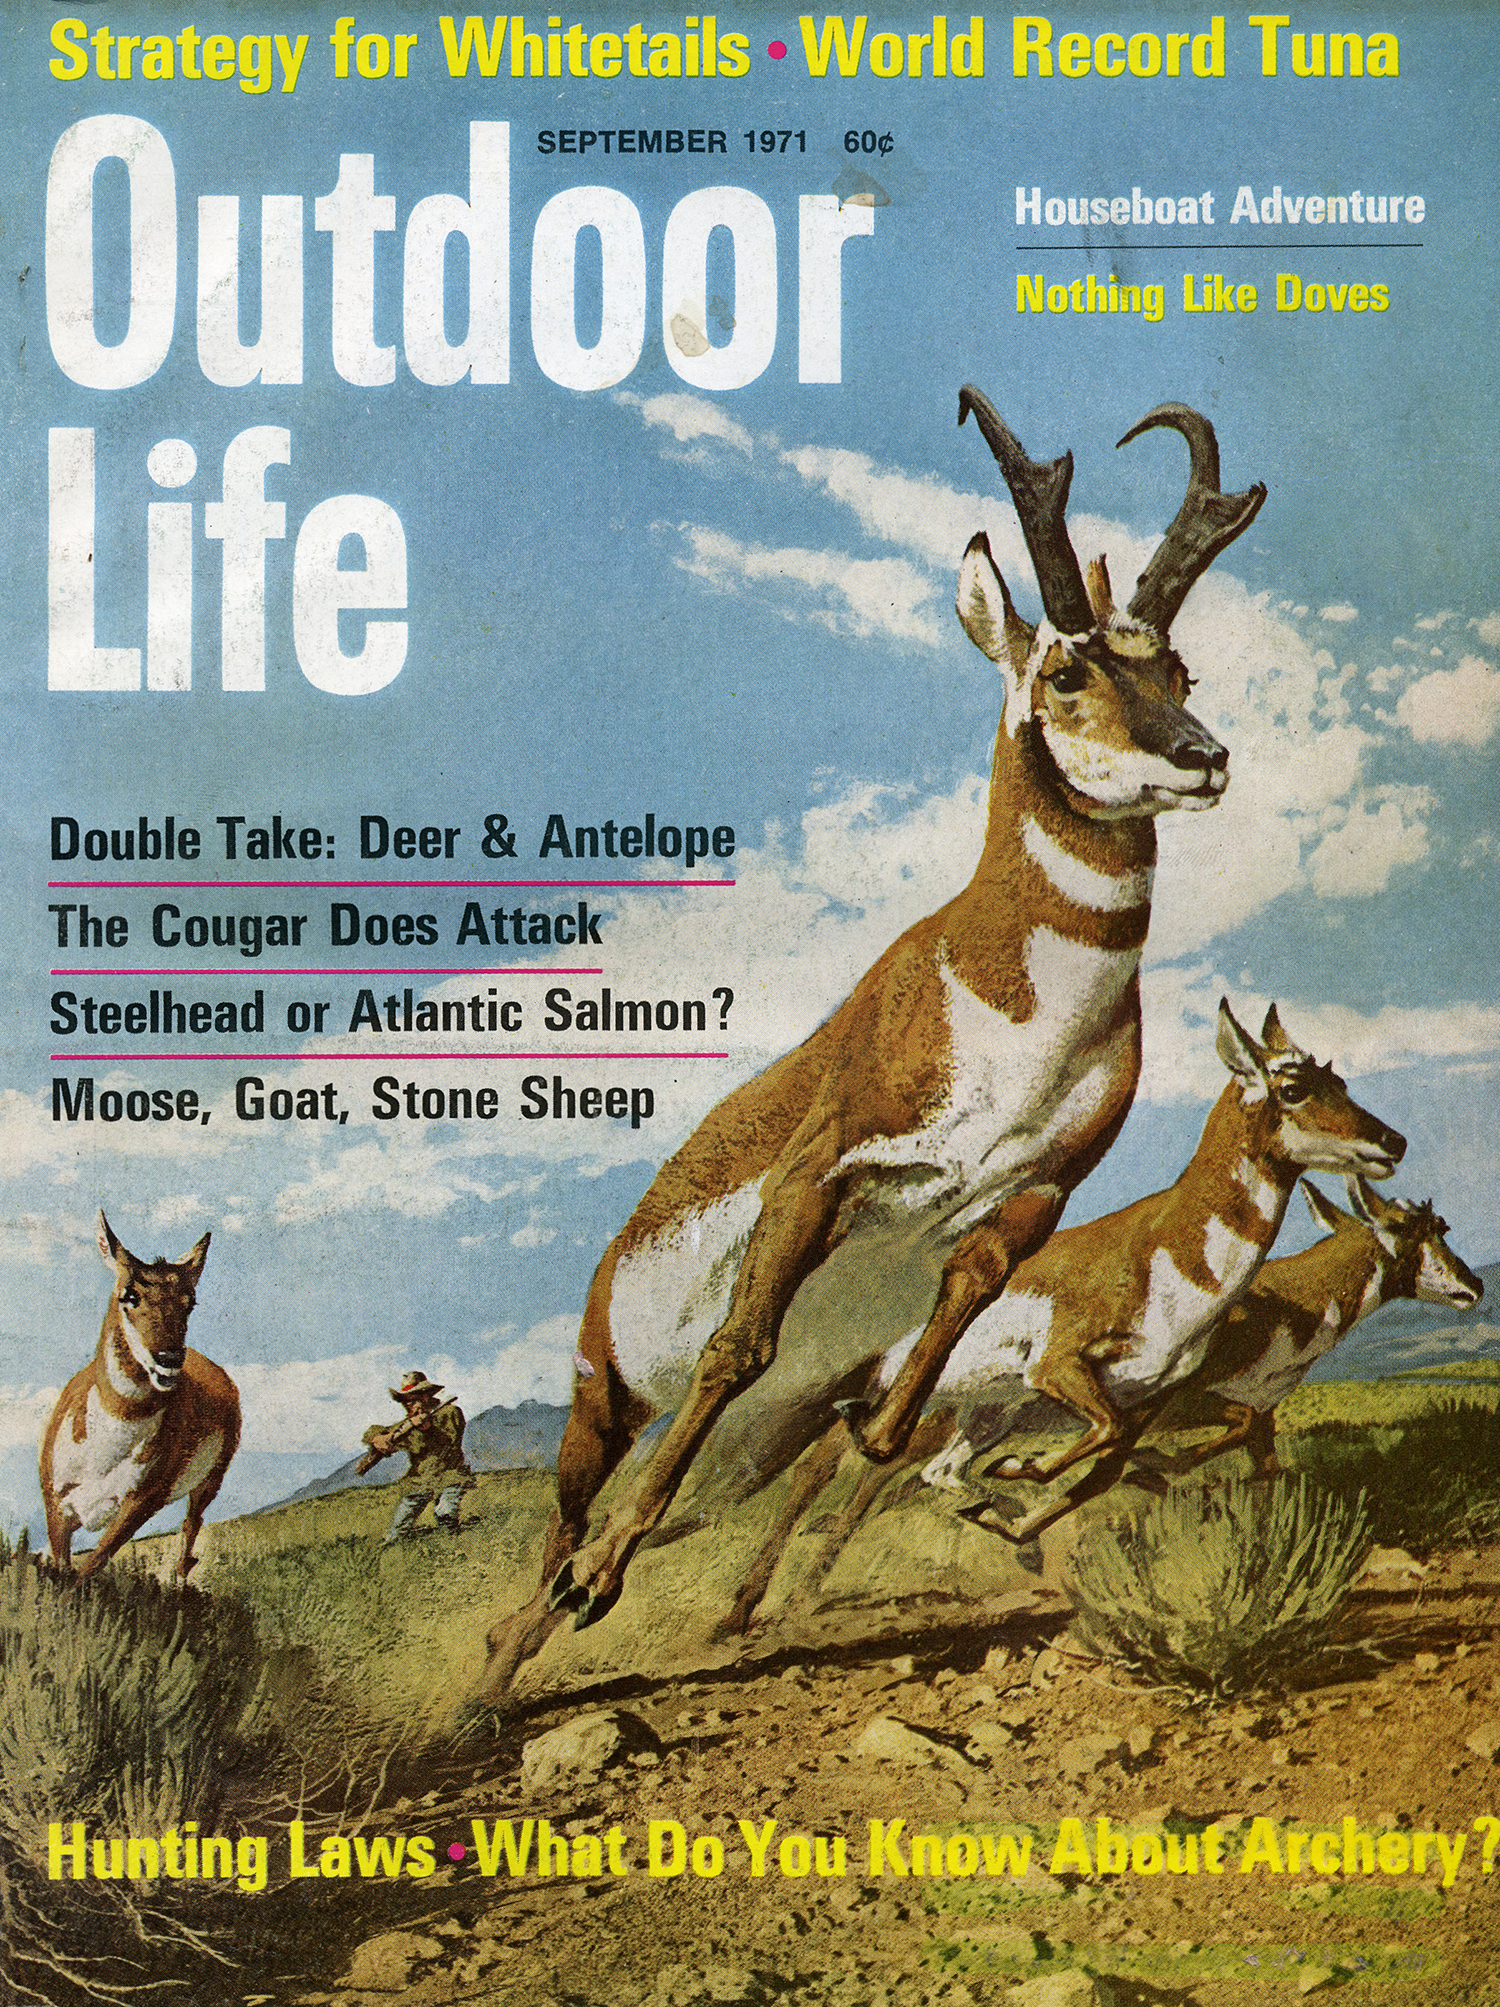 September 1971: Despite their ubiquity on the prairie, pronghorn were rare cover subjects. 